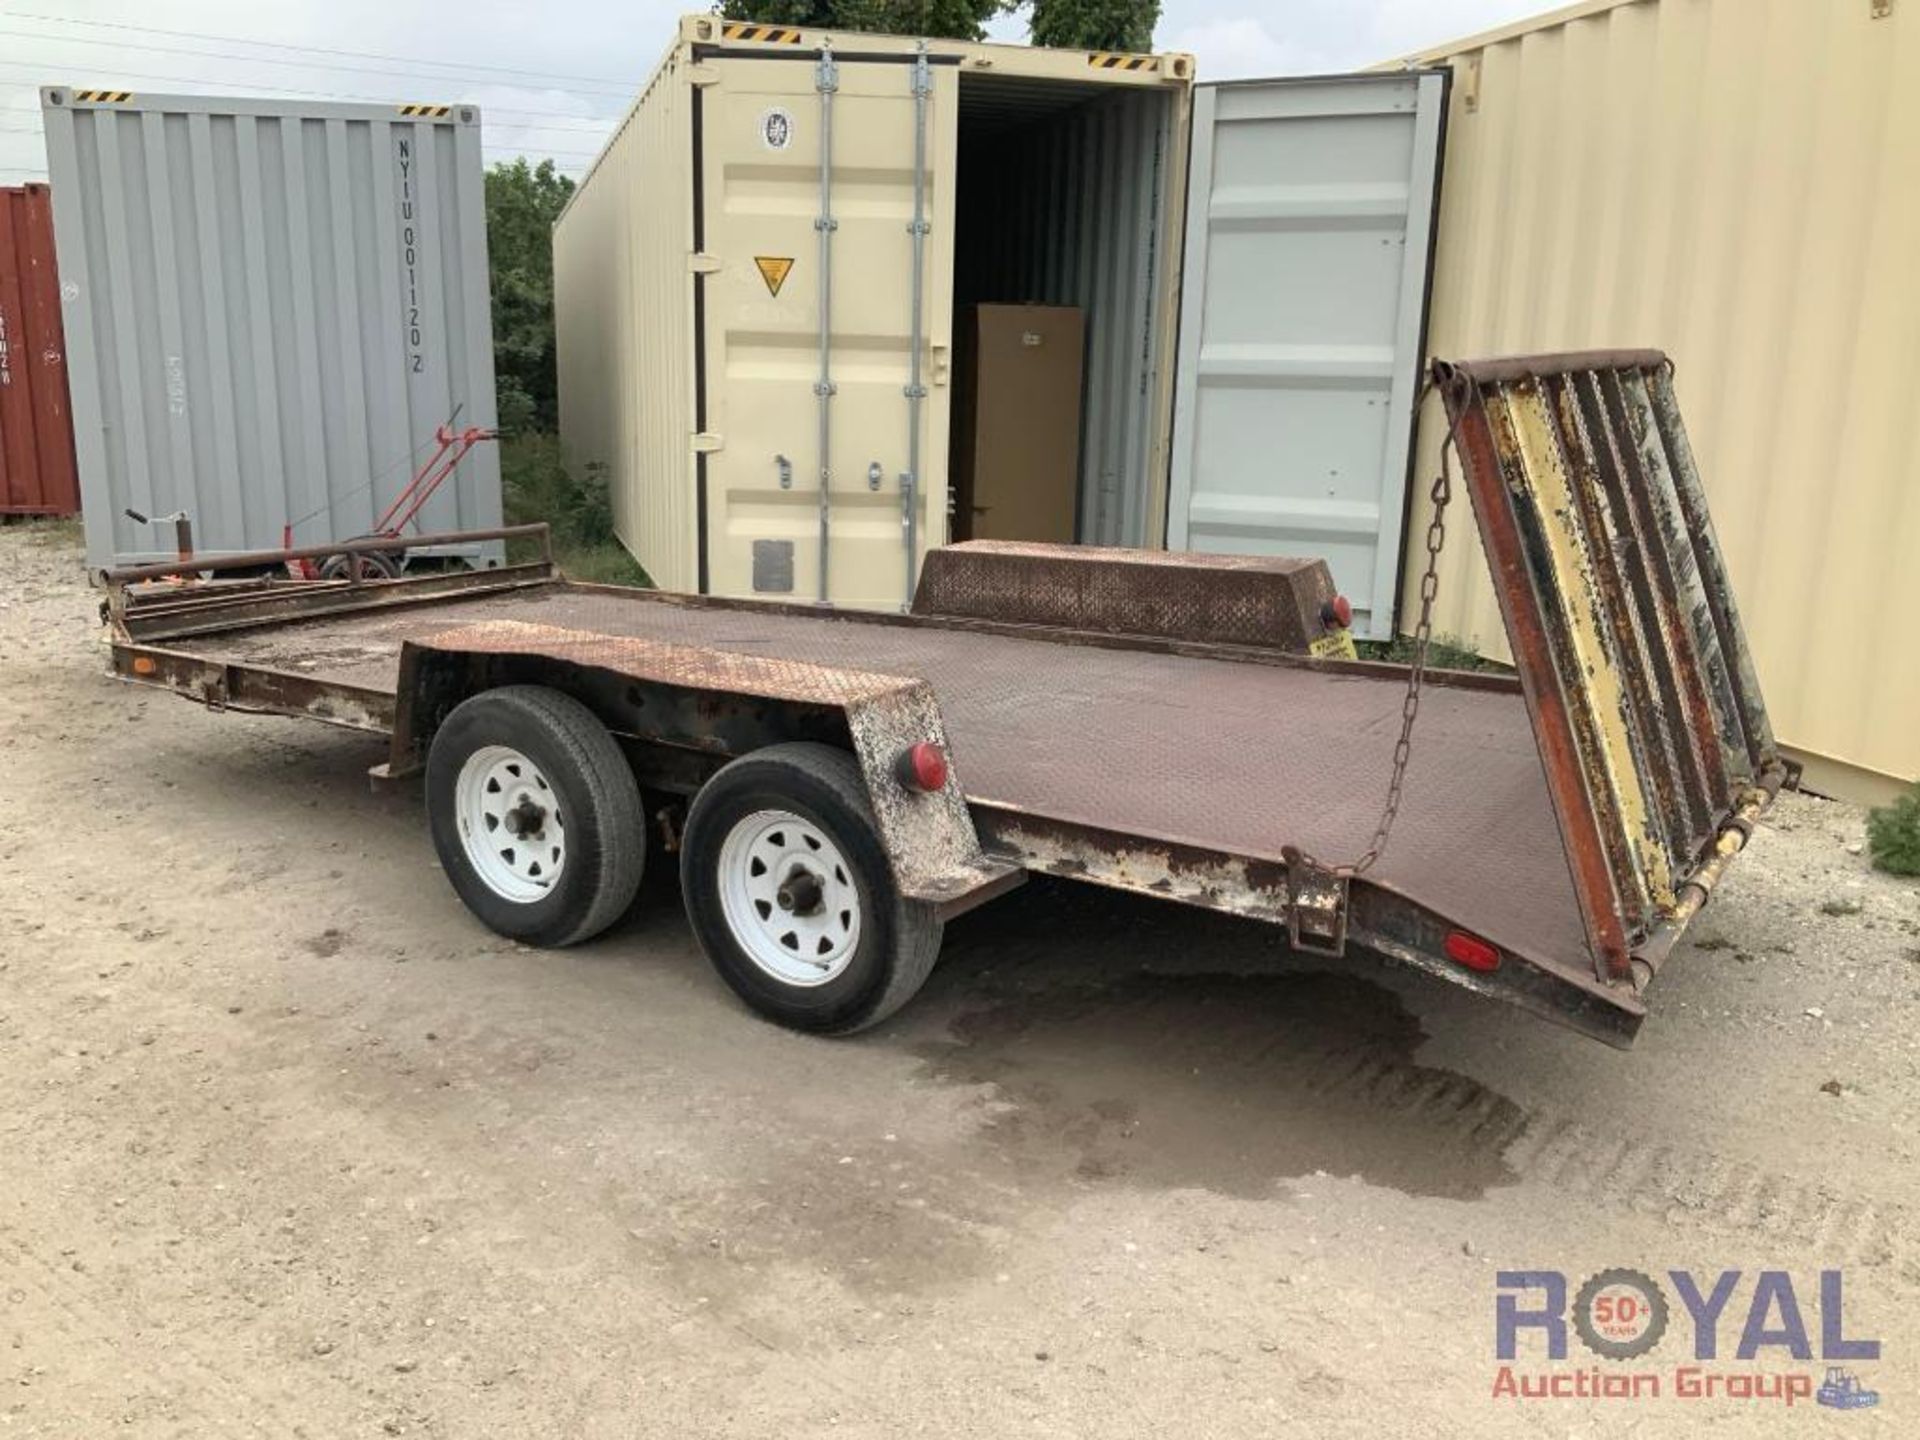 T/A 16ft X 6ft Pintle Hitch T/A Equipment Trailer w/ Fold Down Ramp - Image 3 of 12